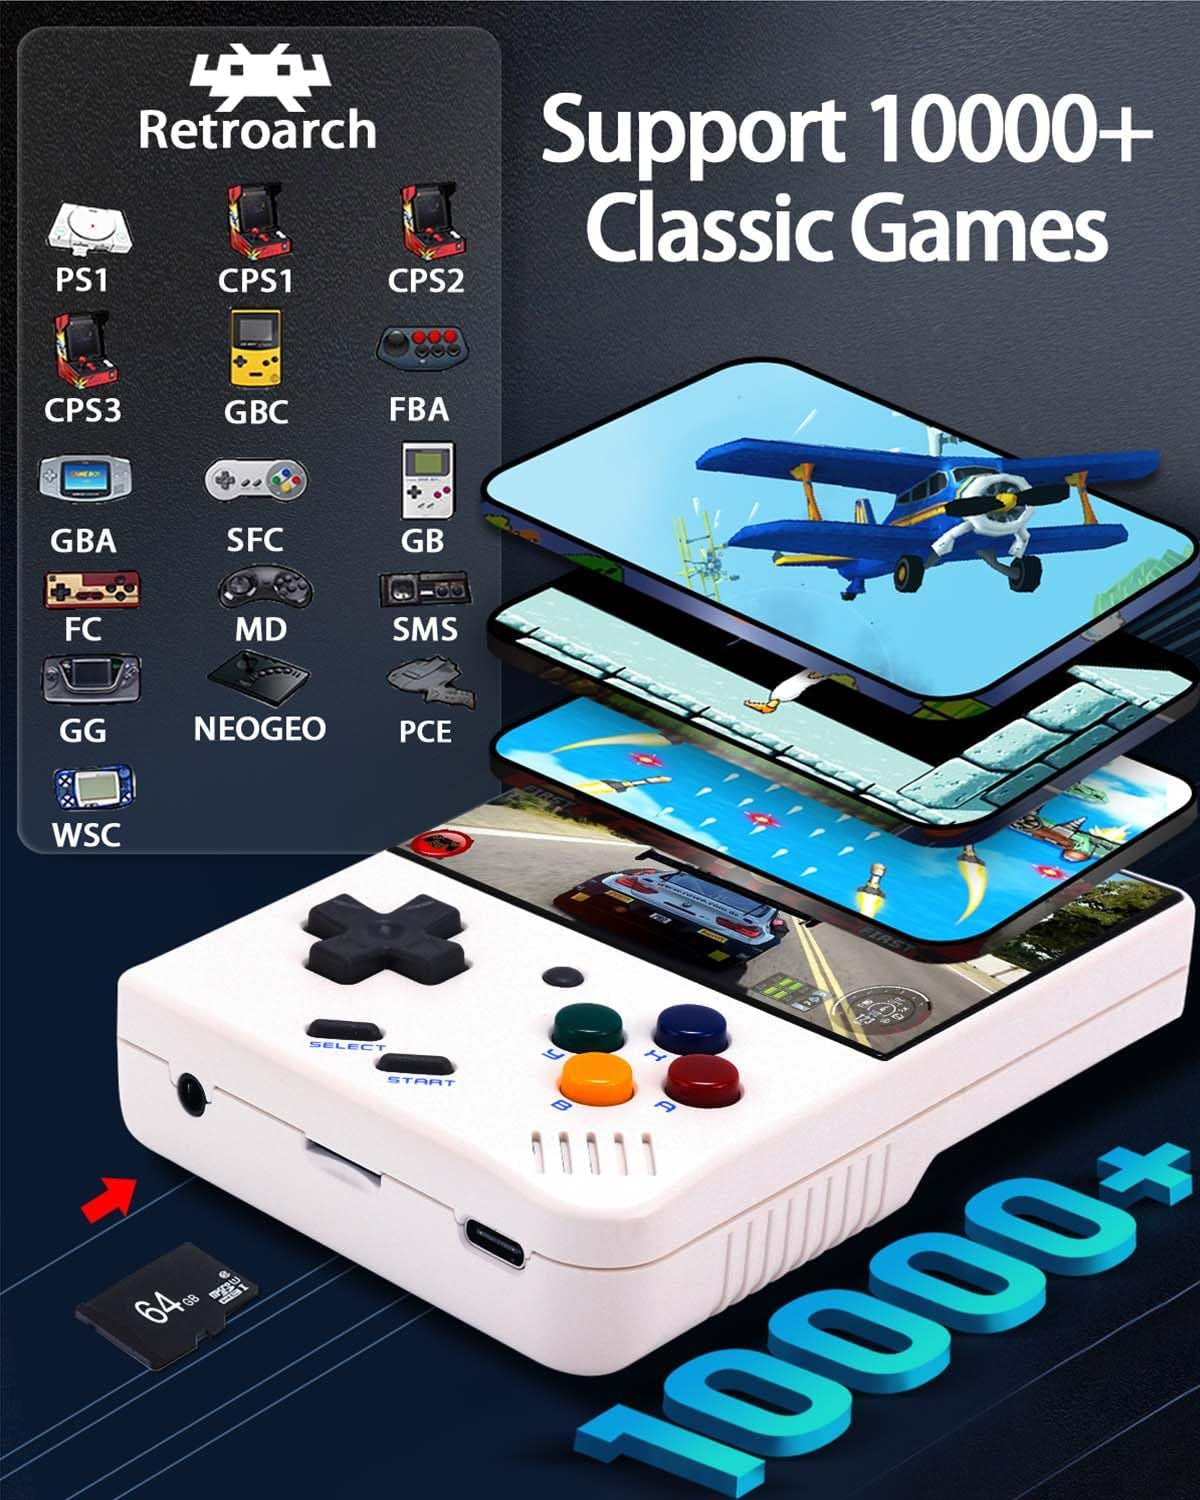 Miyoo Mini Plus,Retro Handheld Game Console with 64G TF Card,Support 10000+Games,3.5-Inch Portable Rechargeable Open Source Game Console Emulator with Storage Case,Support Wifi. (White, 3.5-Inch)